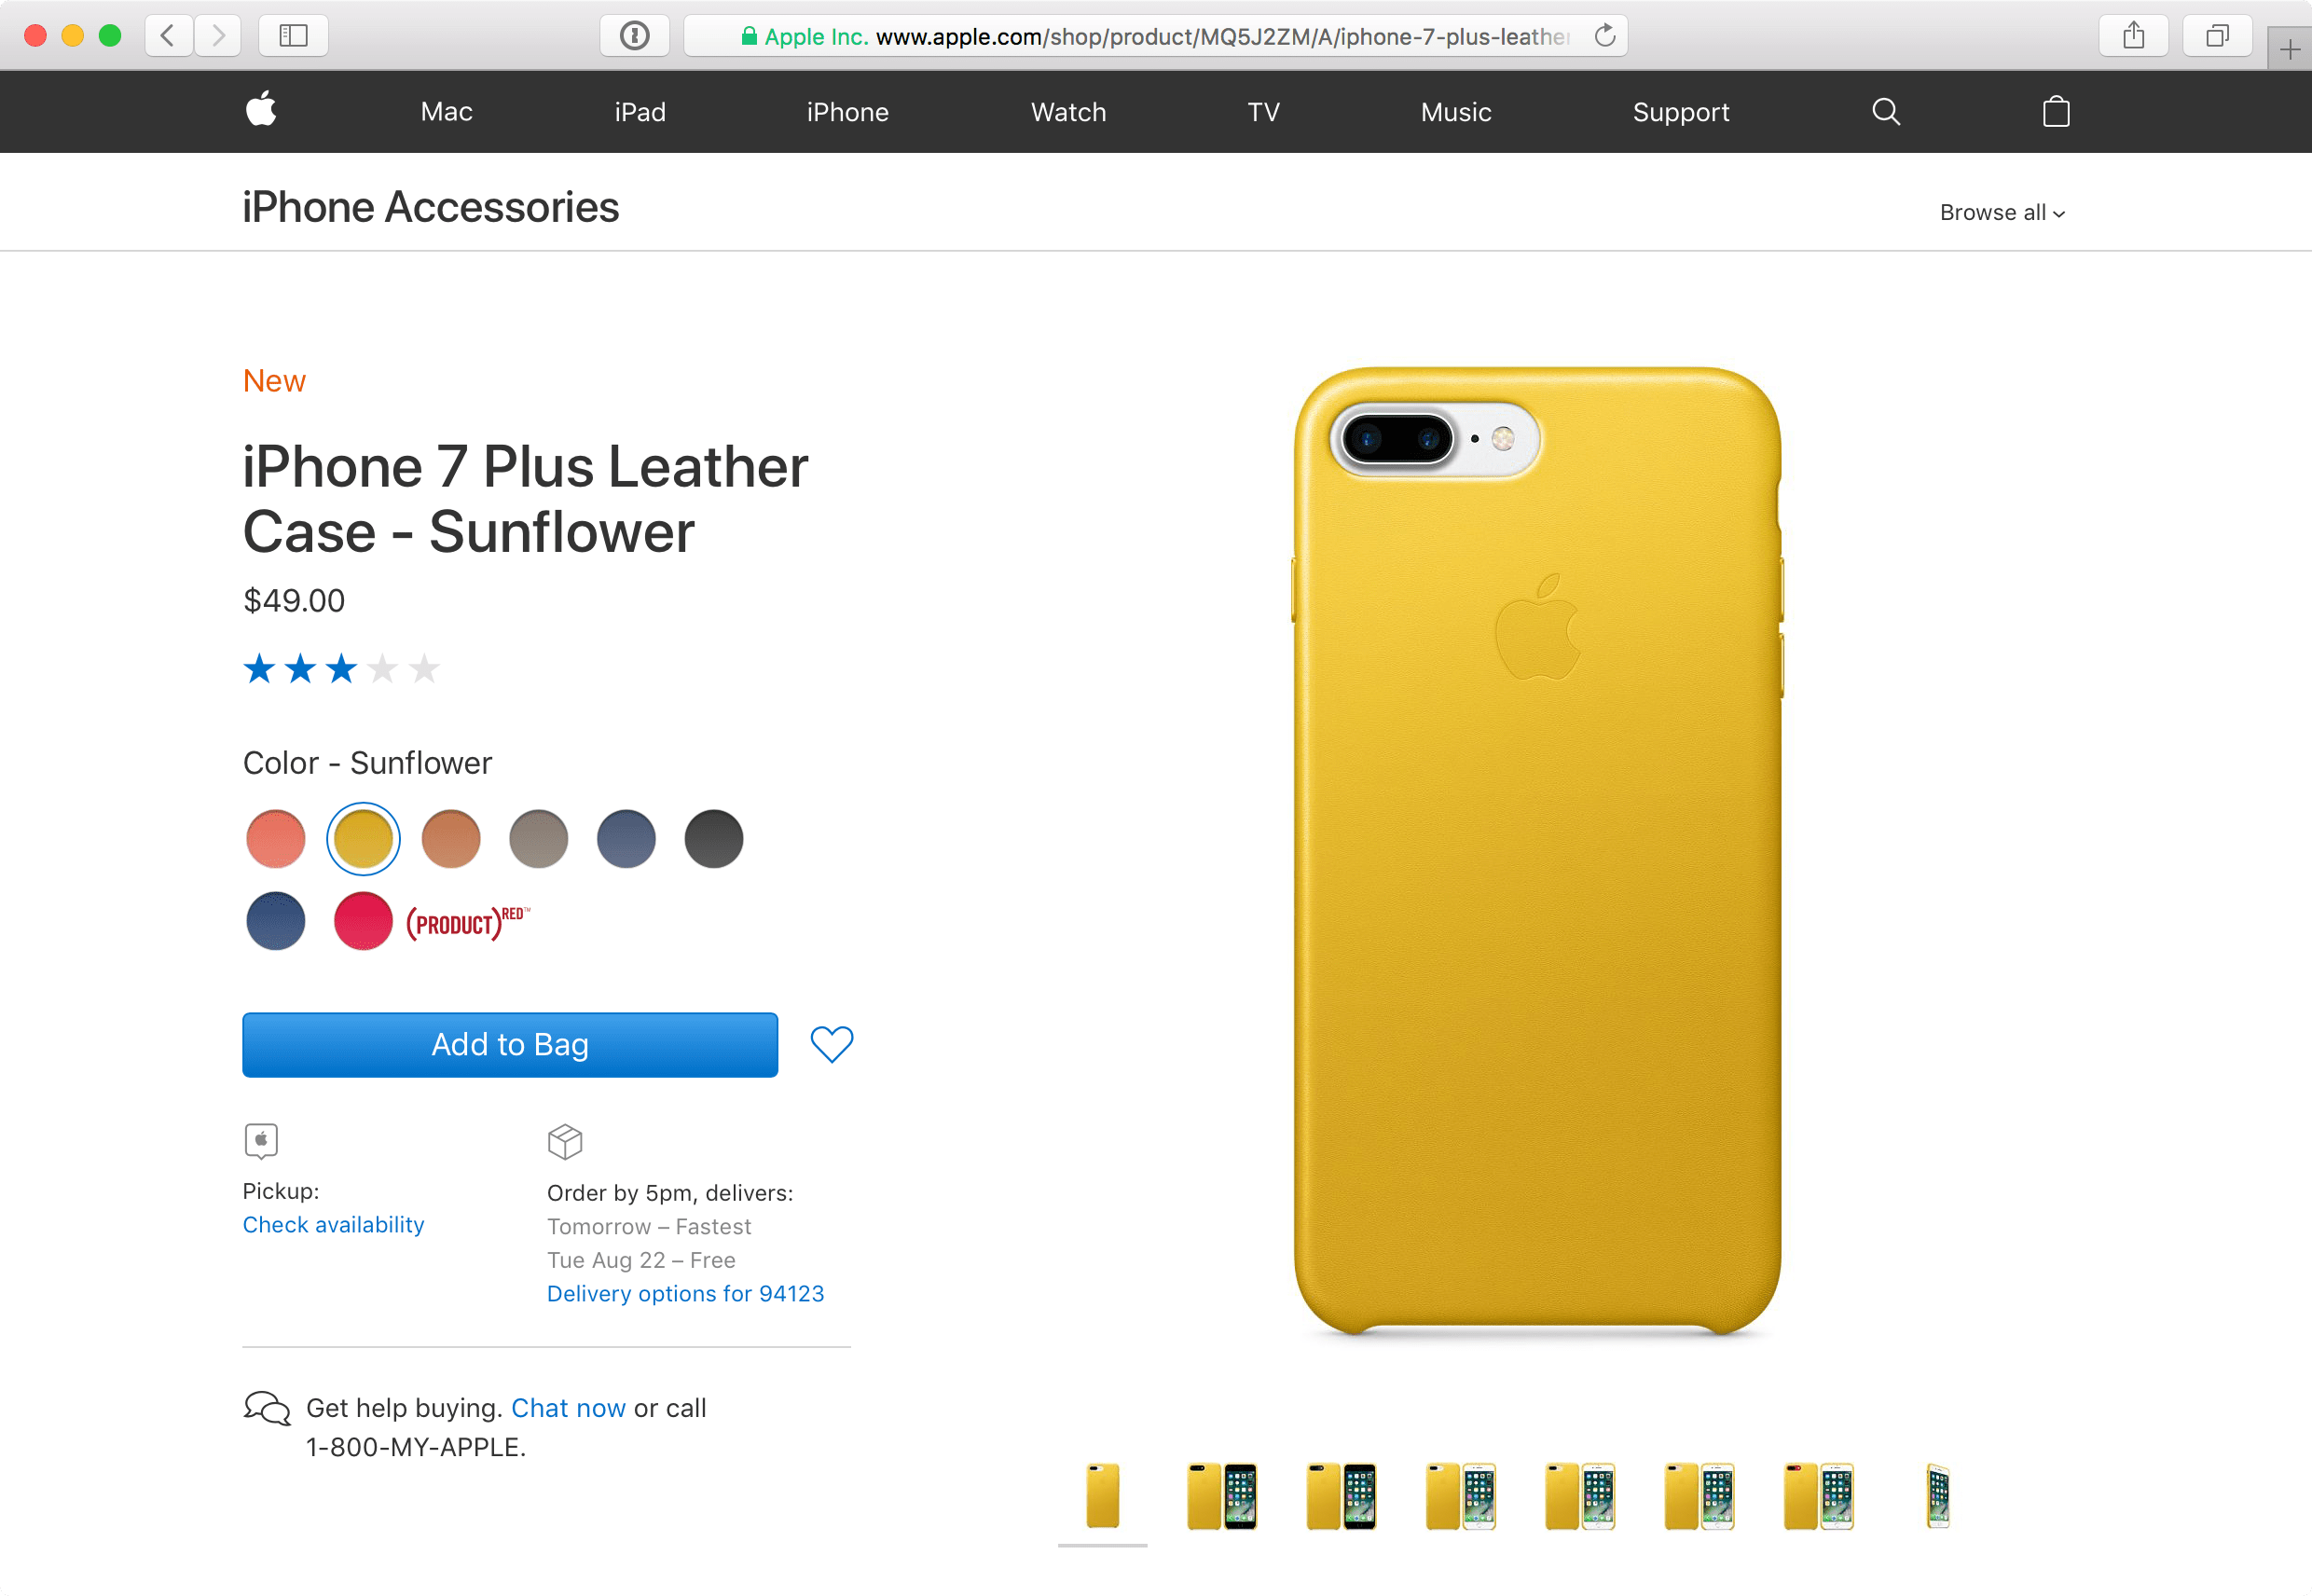 IPhone 7 Cases for Sale on the Apple Store